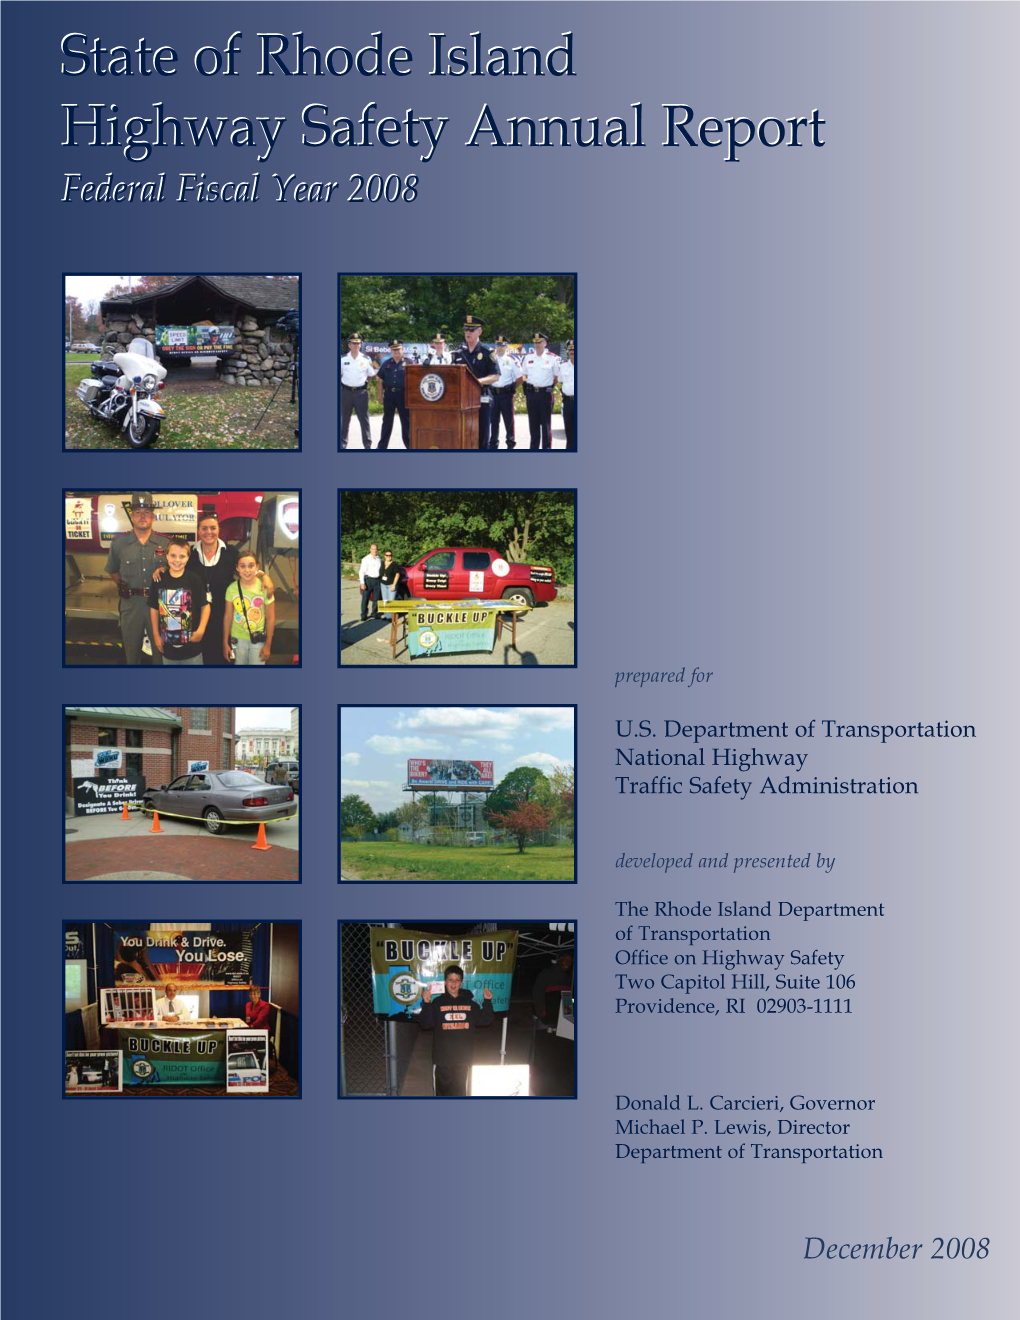 State of Rhode Island Highway Safety Annual Report Federal Fiscal Year 2008